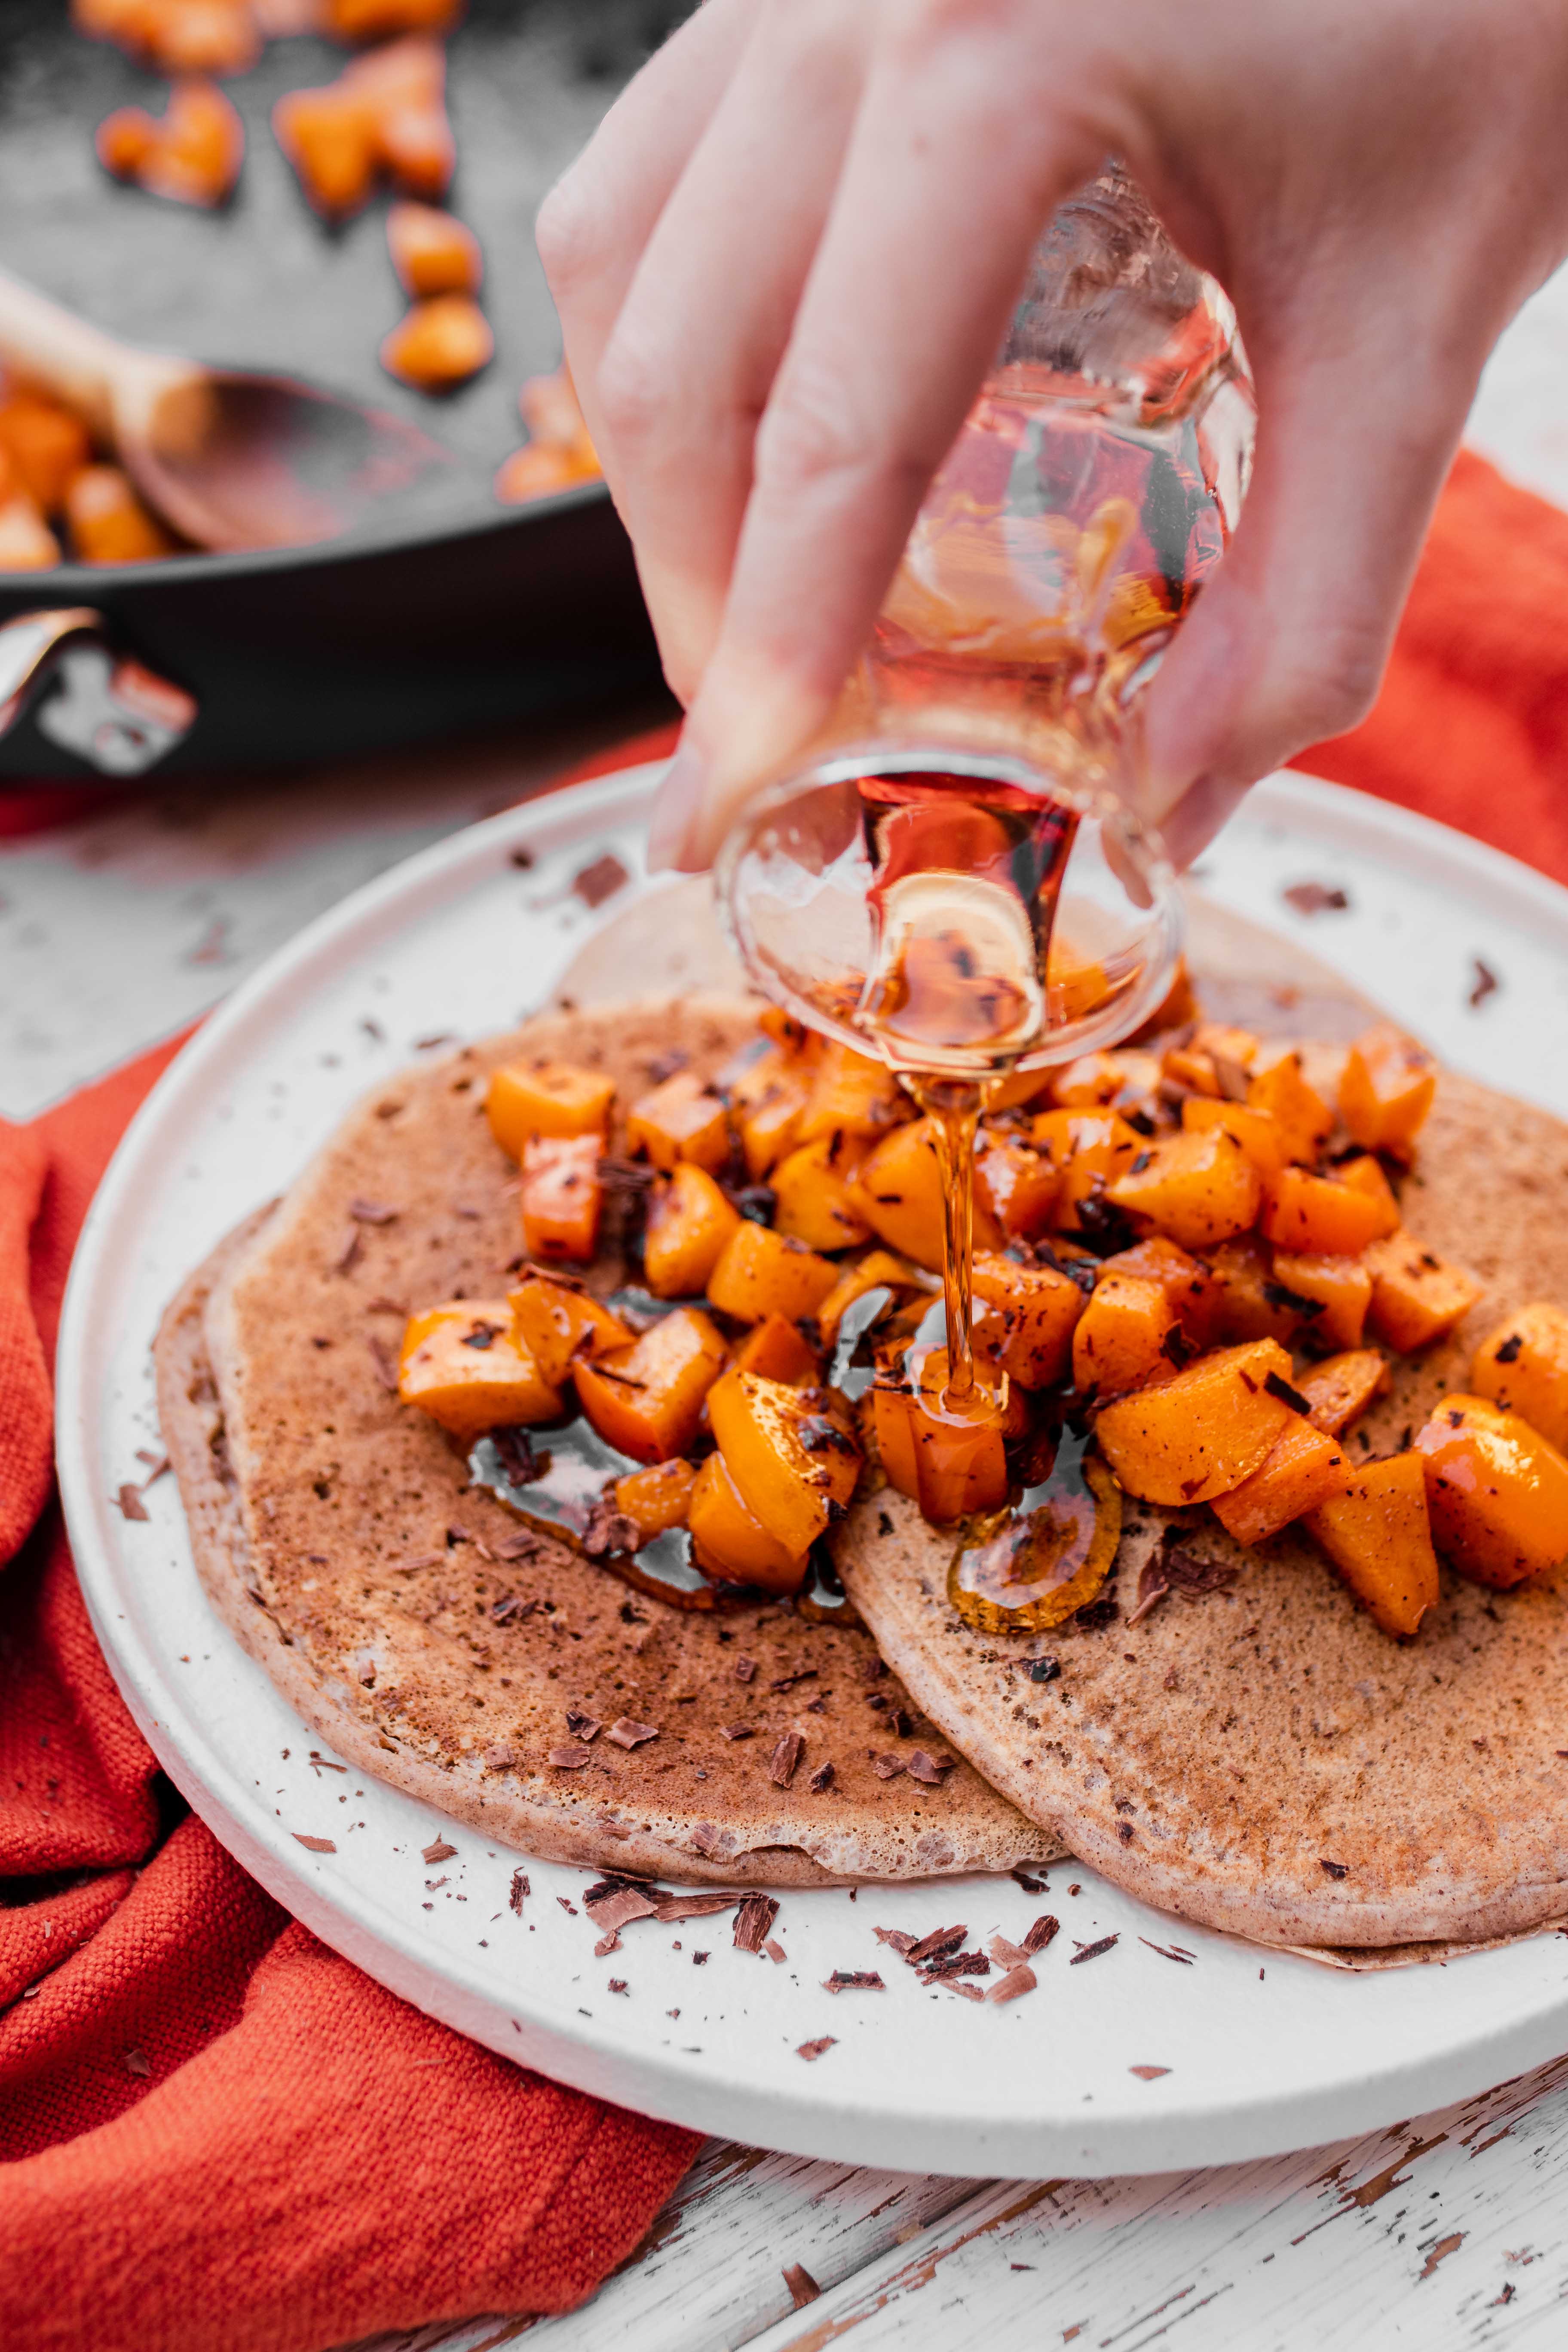 maple syrup pour over spiced pancakes with persimmons